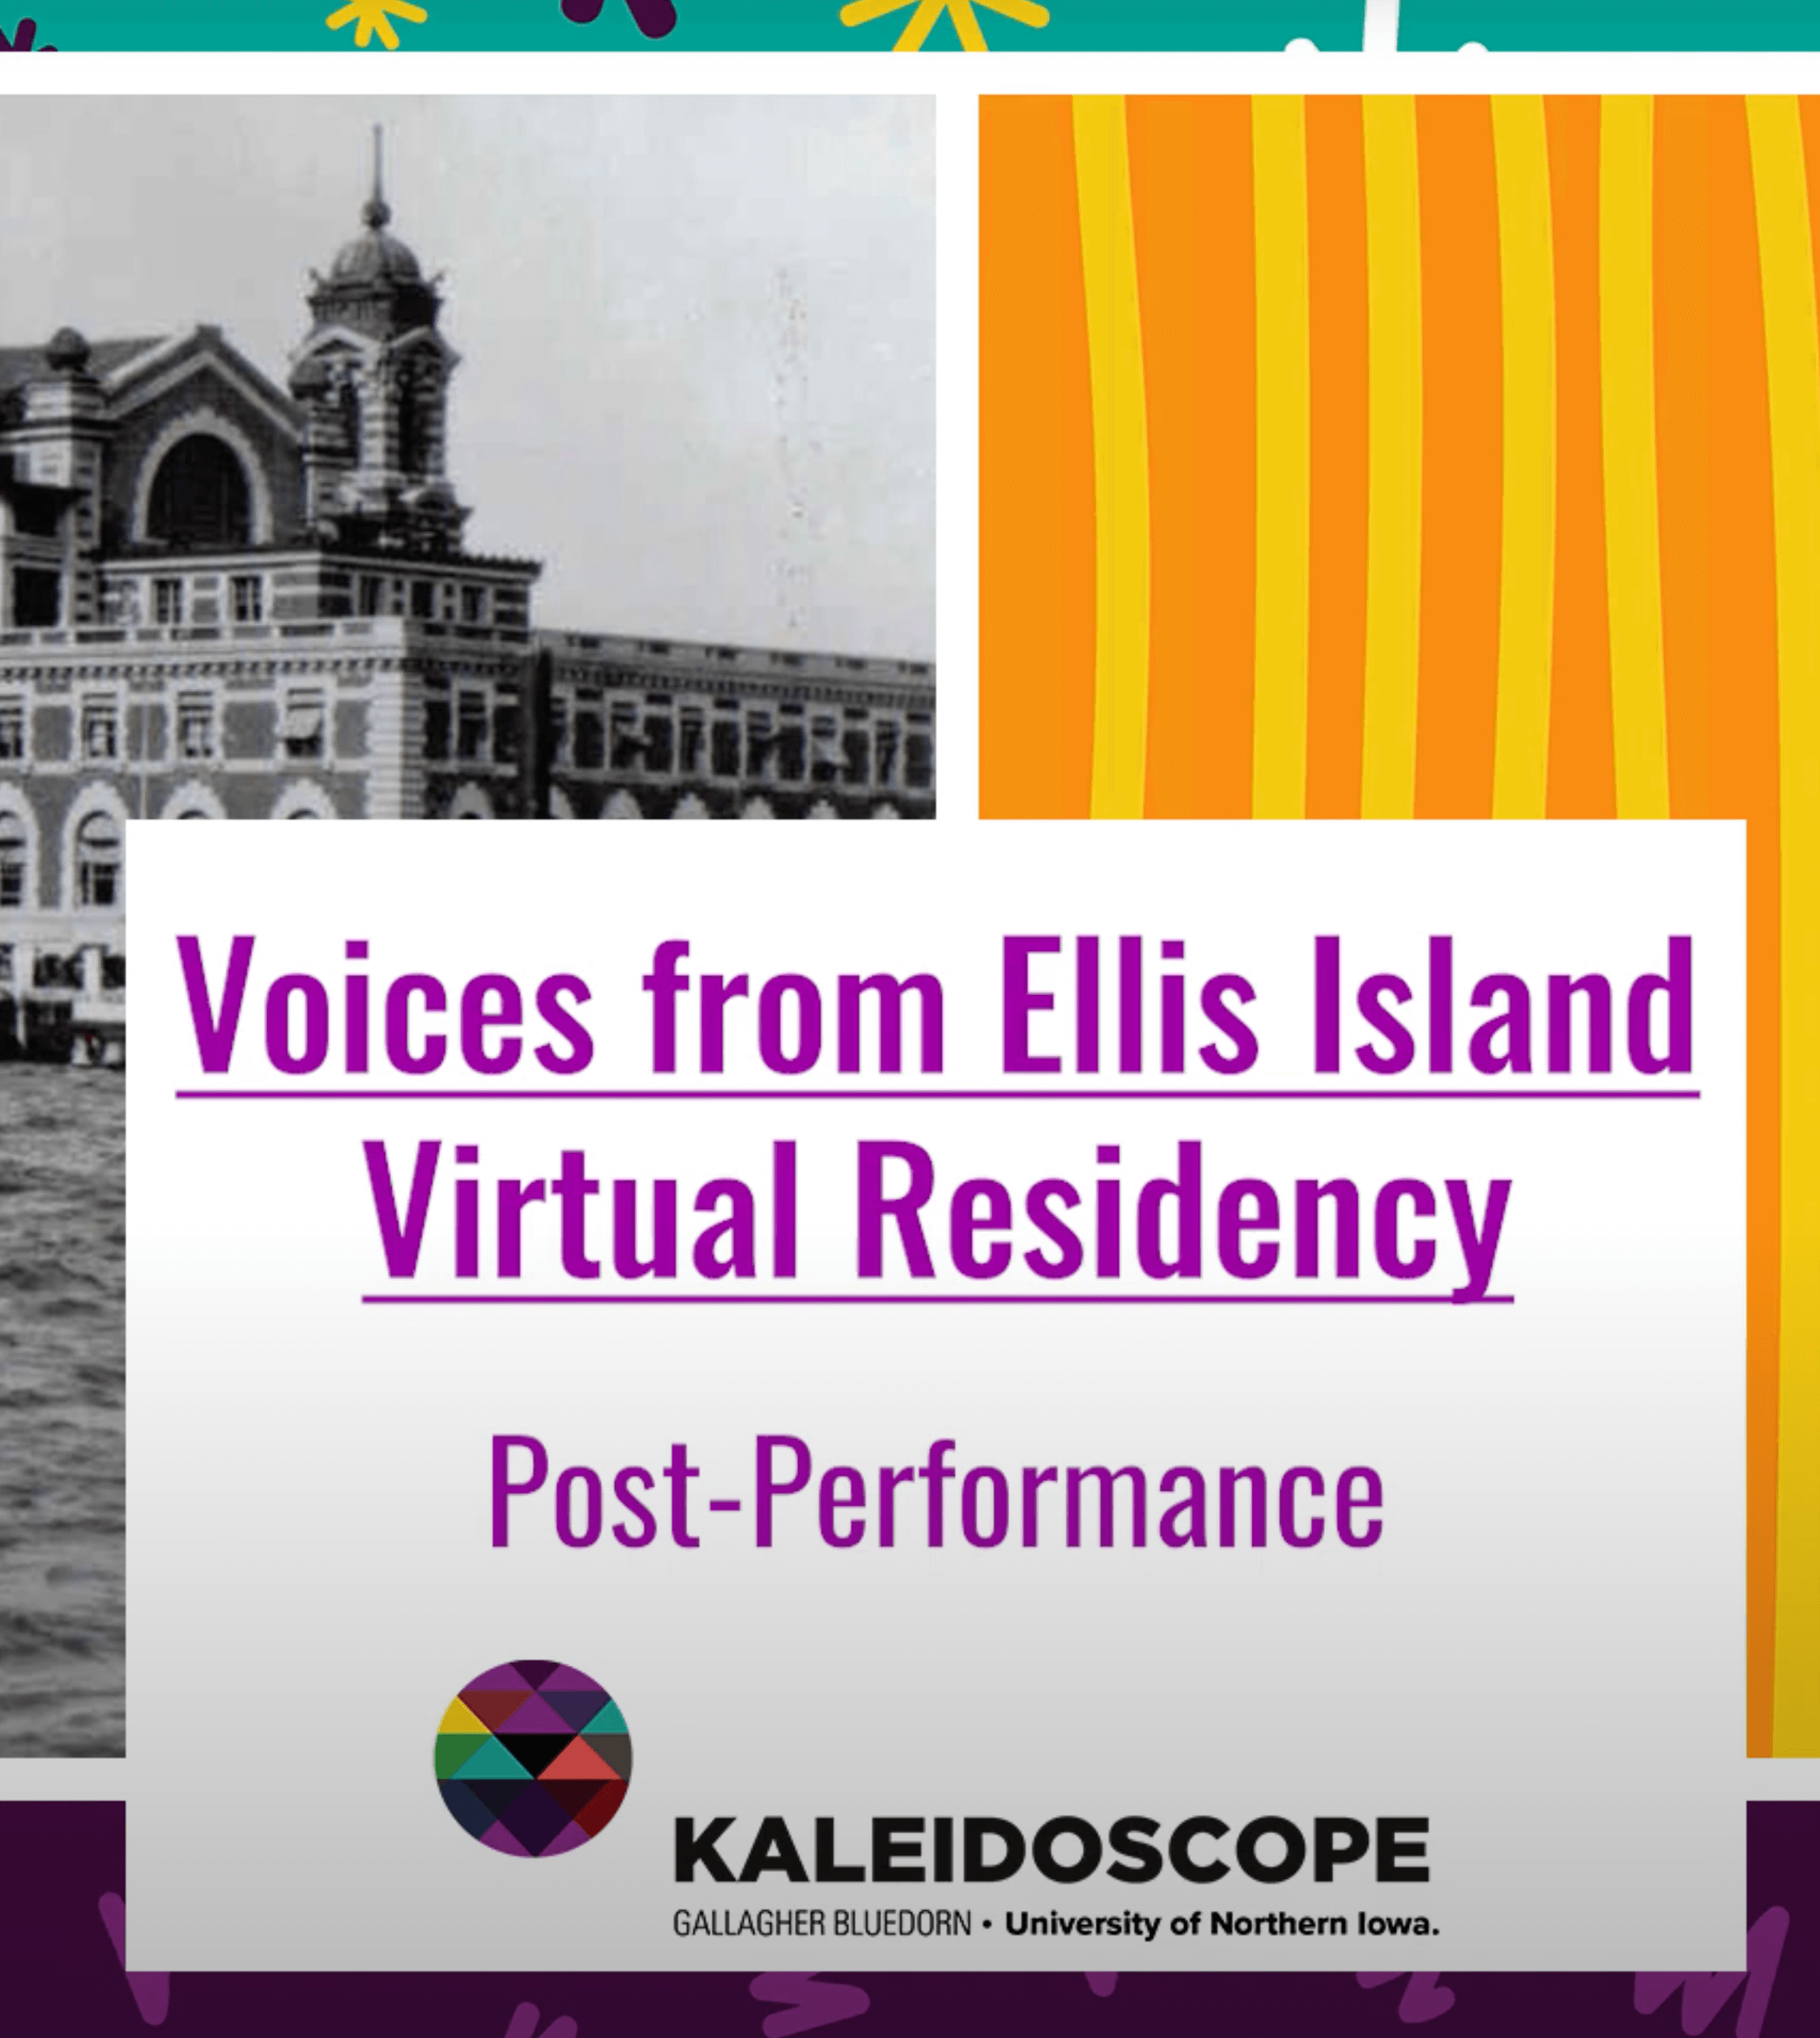 Voices from Ellis Island Virtual Residency Post-Performance